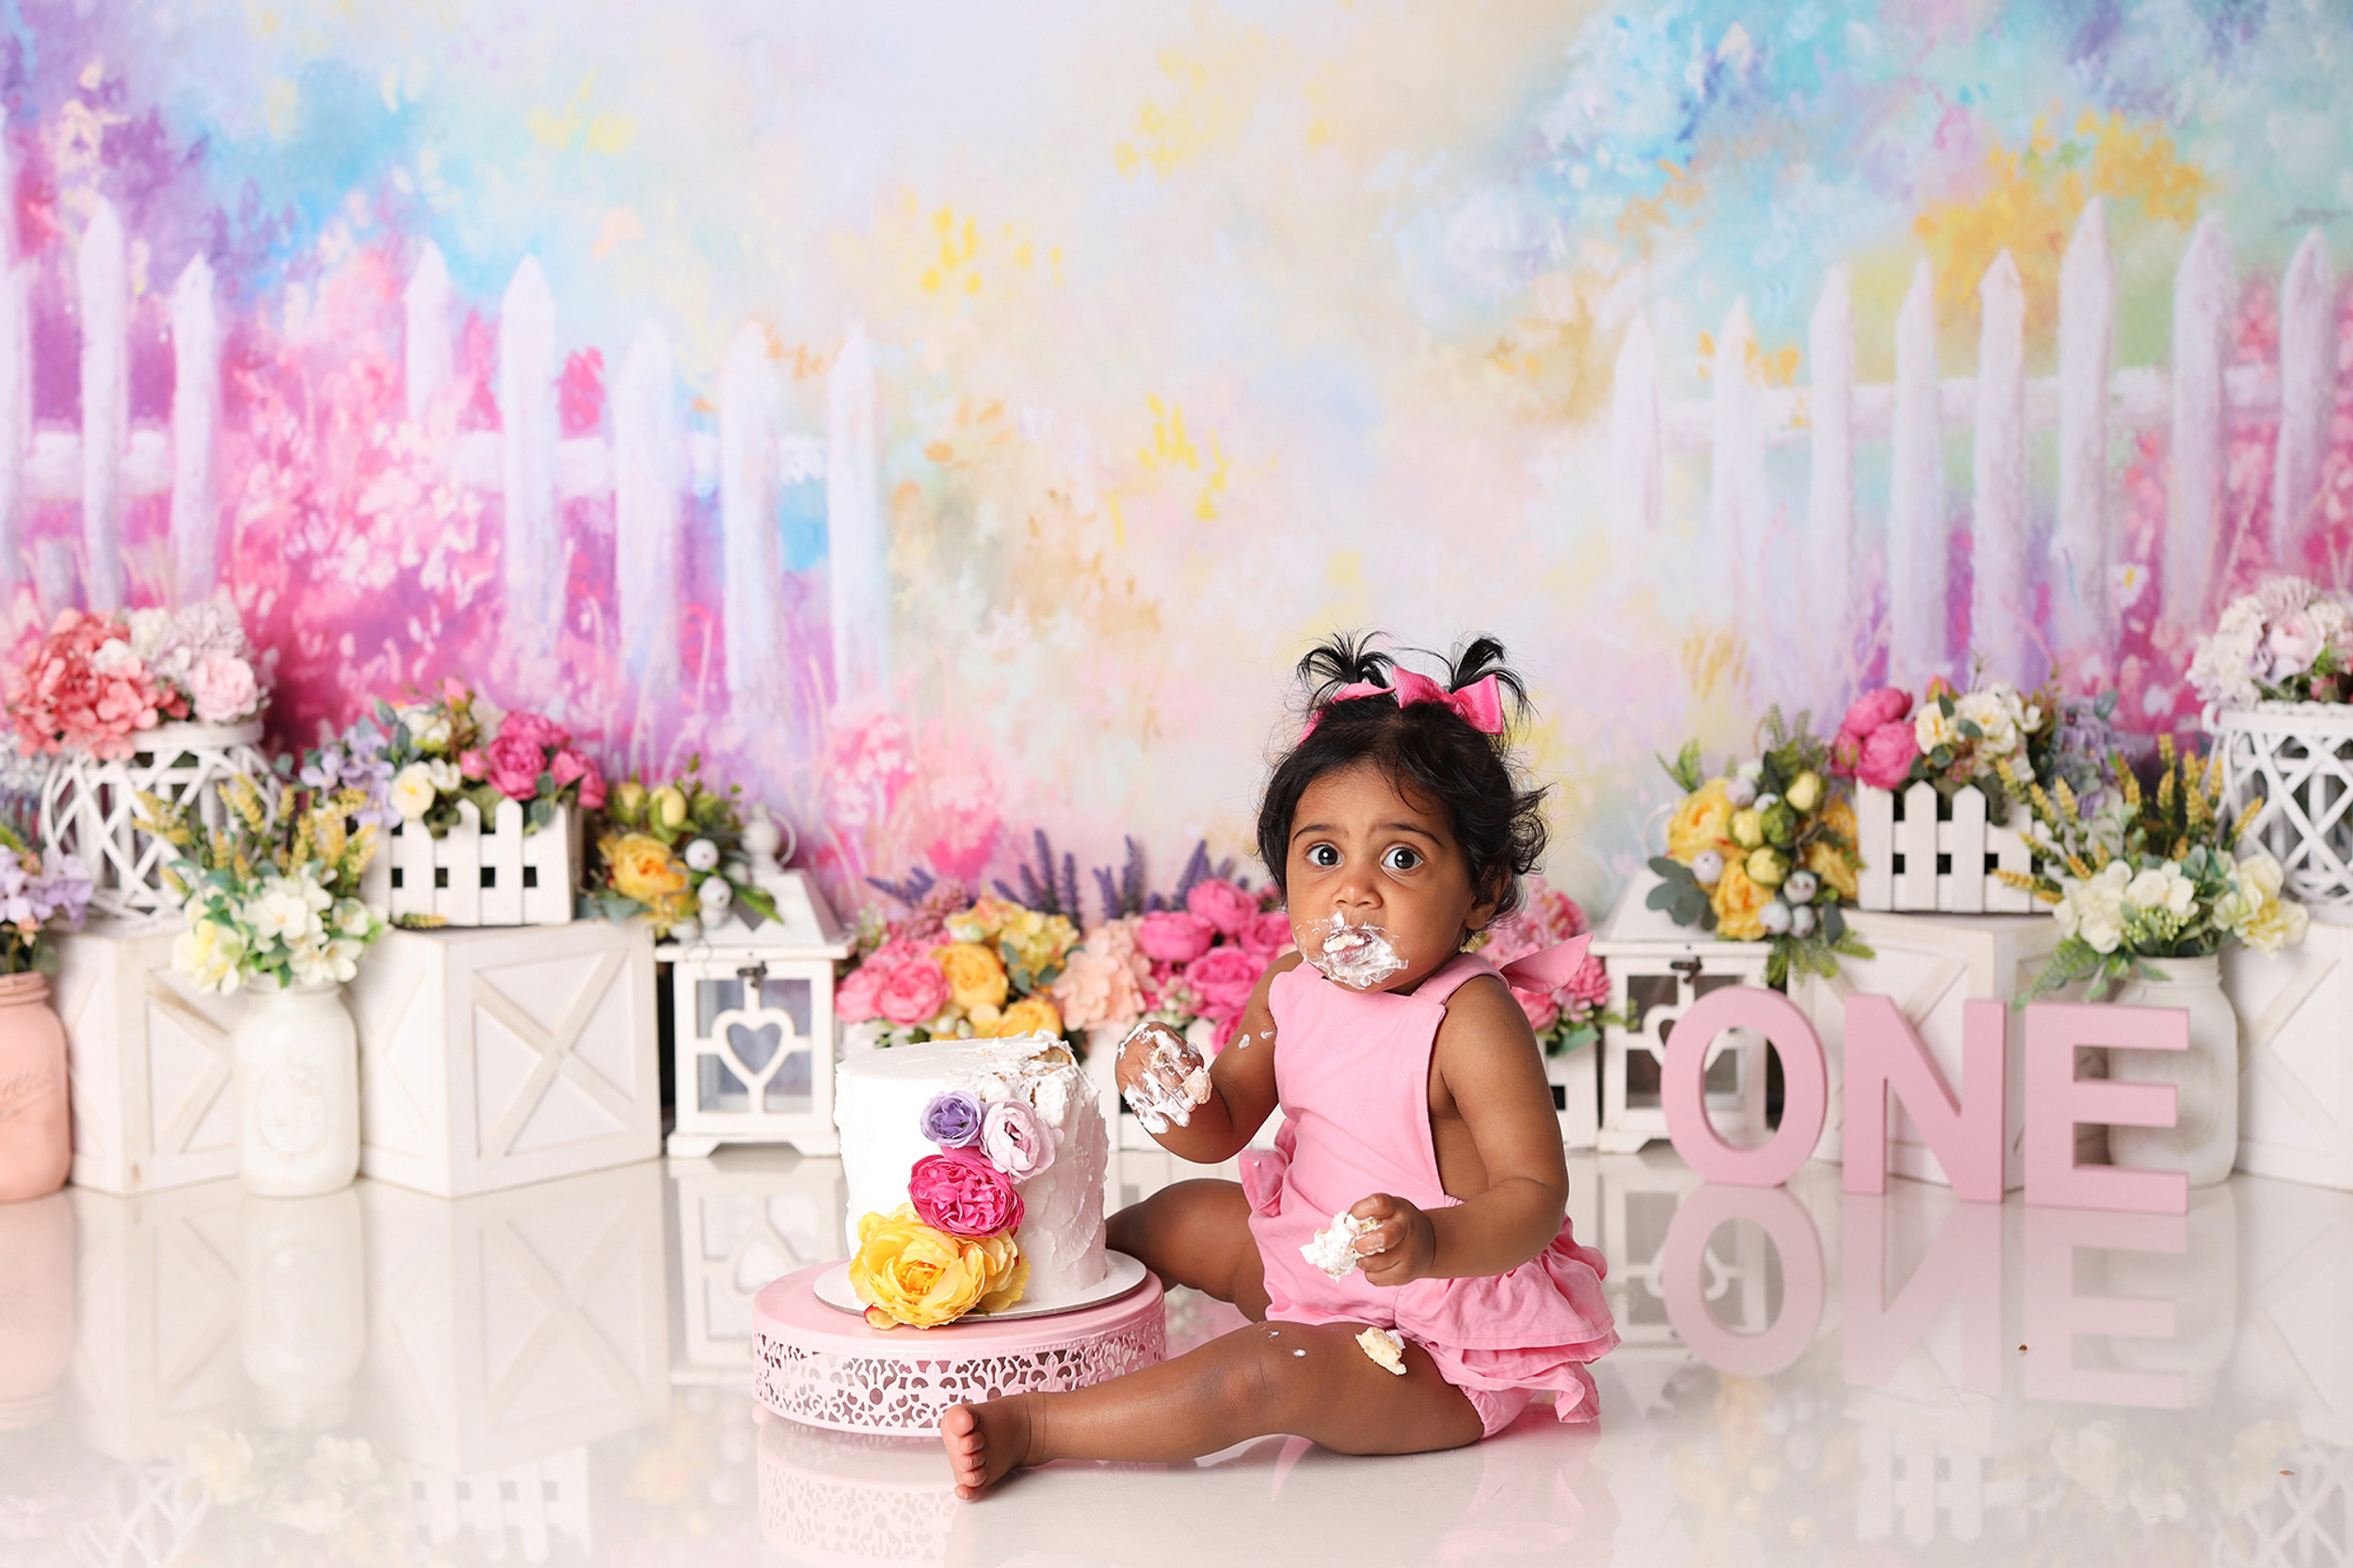 Alana Taylor Photography. Top 10 Best Cake Smash Photographers in the World - 44